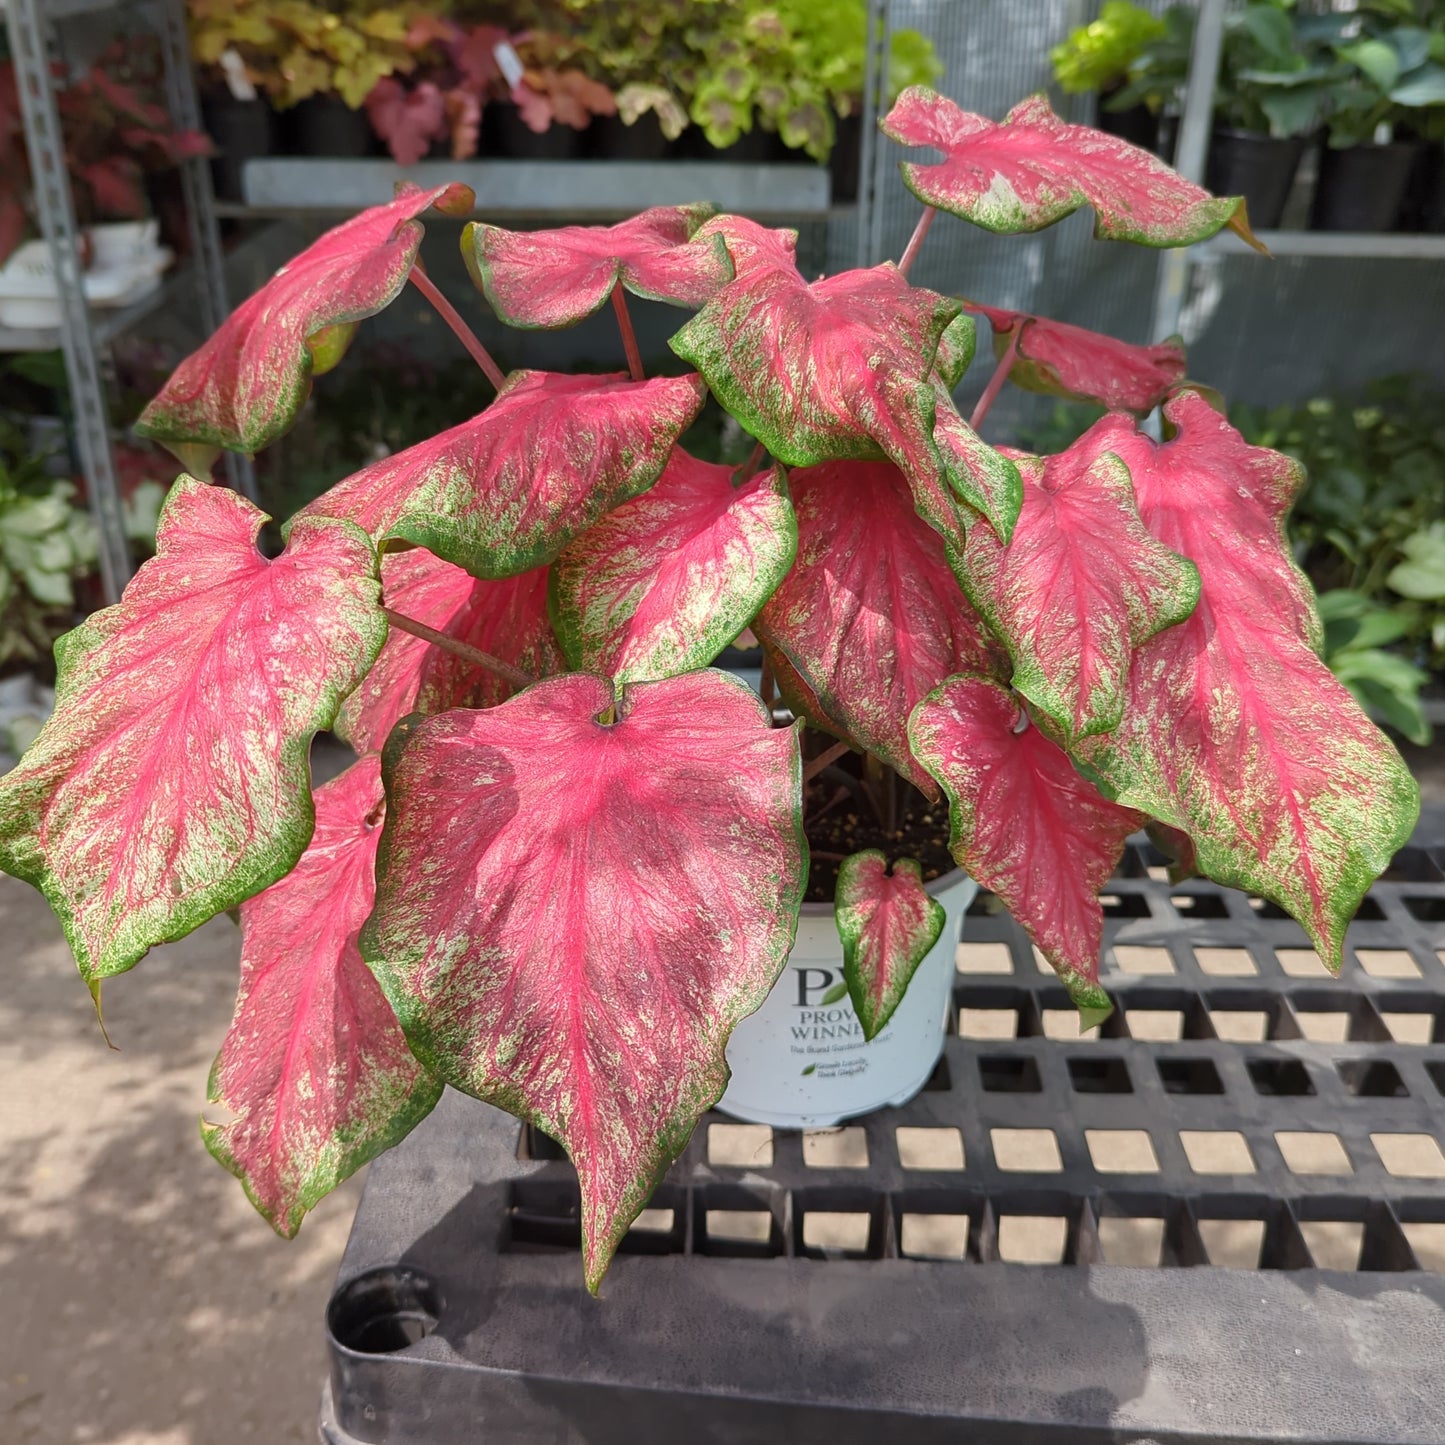 Tickle Me Pink Caladium (Caladium 'Tickle Me Pink) in a 6 inch pot. Indoor plant for sale by Promise Supply for delivery and pickup in Toronto